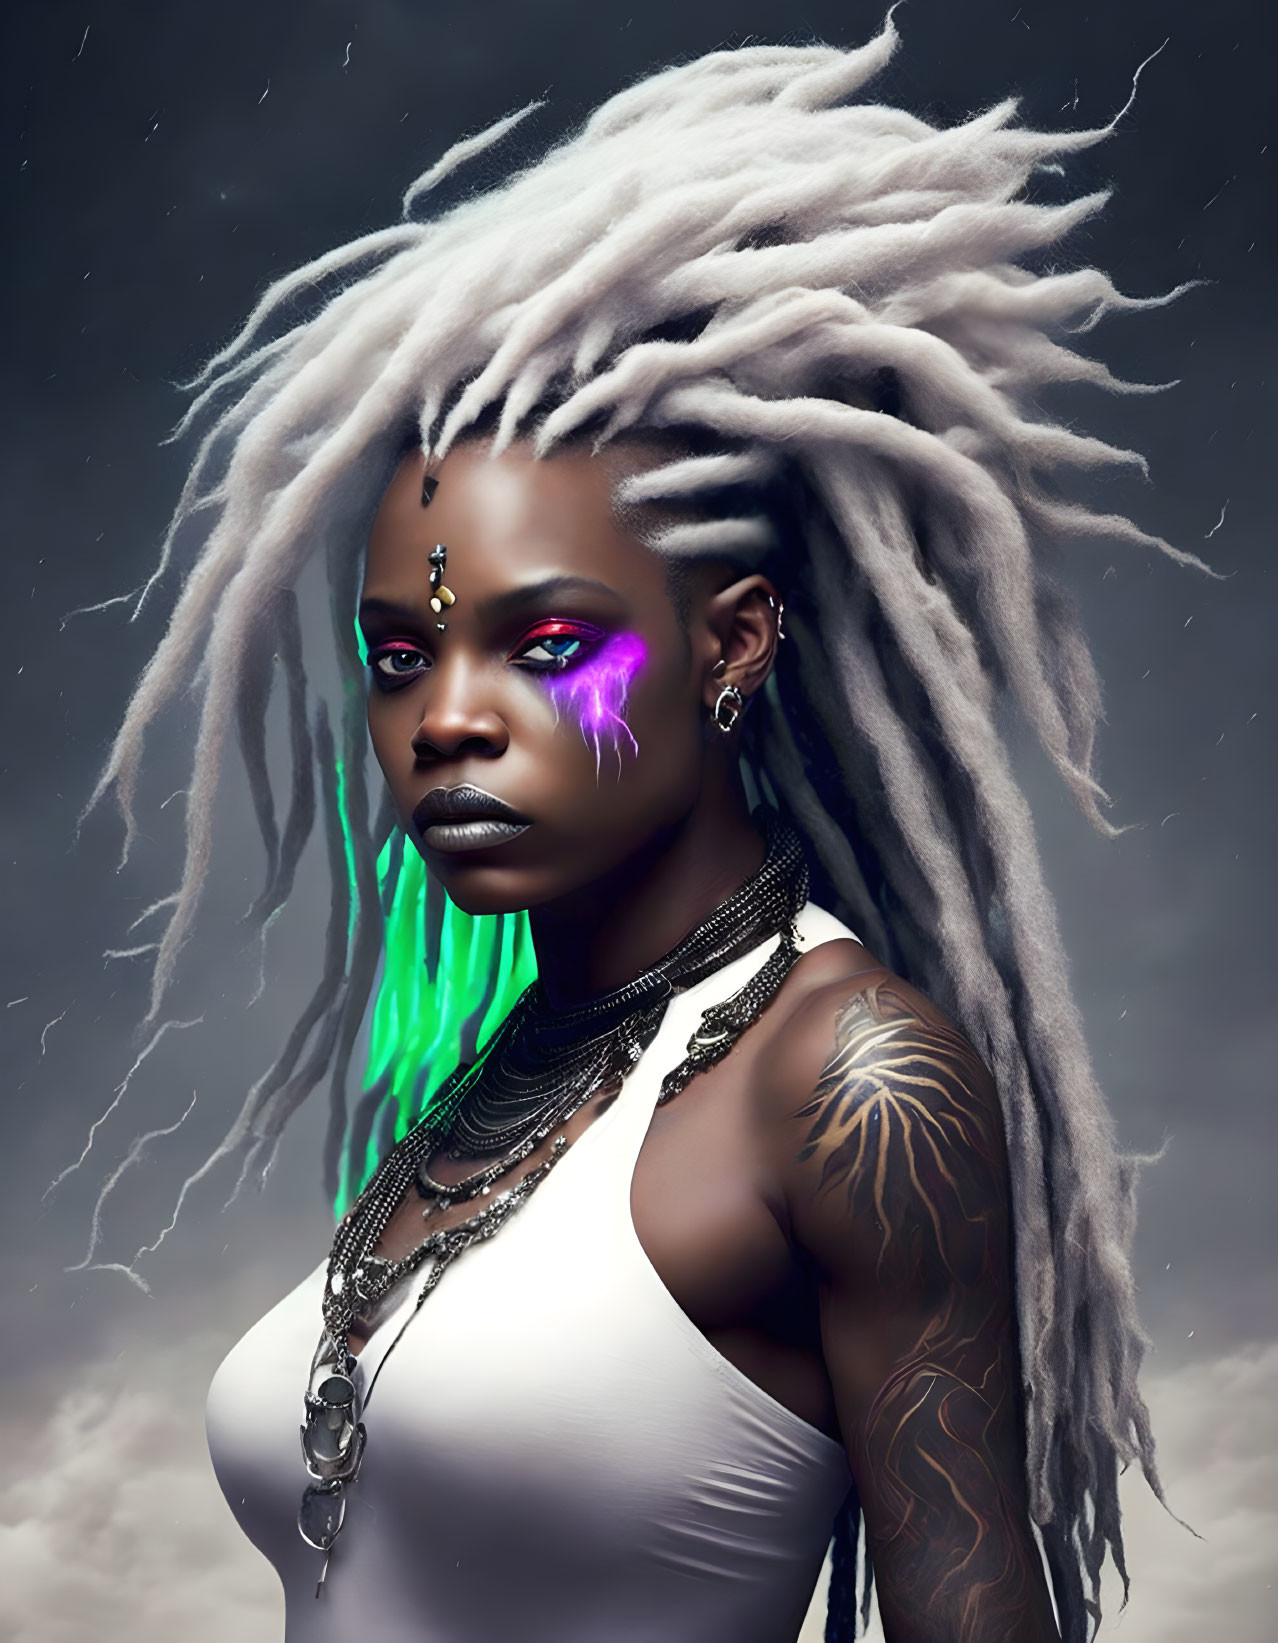 Woman with White Dreadlocks and Purple Eye Makeup Stands Confidently